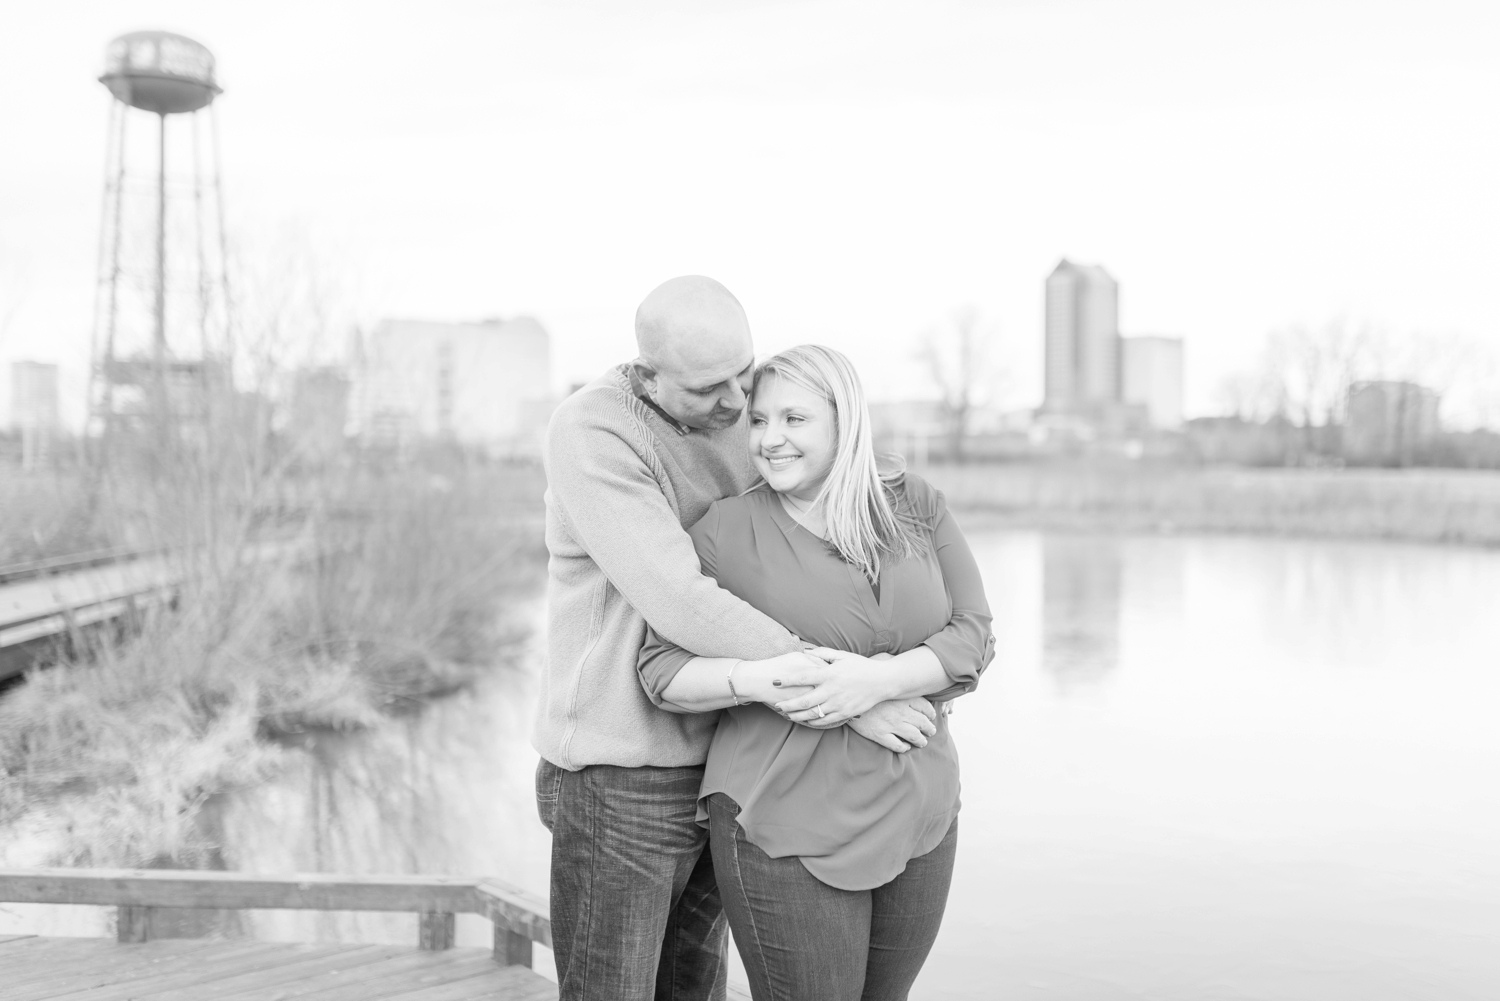 winter-engaged-couple-at-their-photo-session-at-the-scioto-audubon-park-near-grange-audubon-center-with-walkways-and-grass_0351